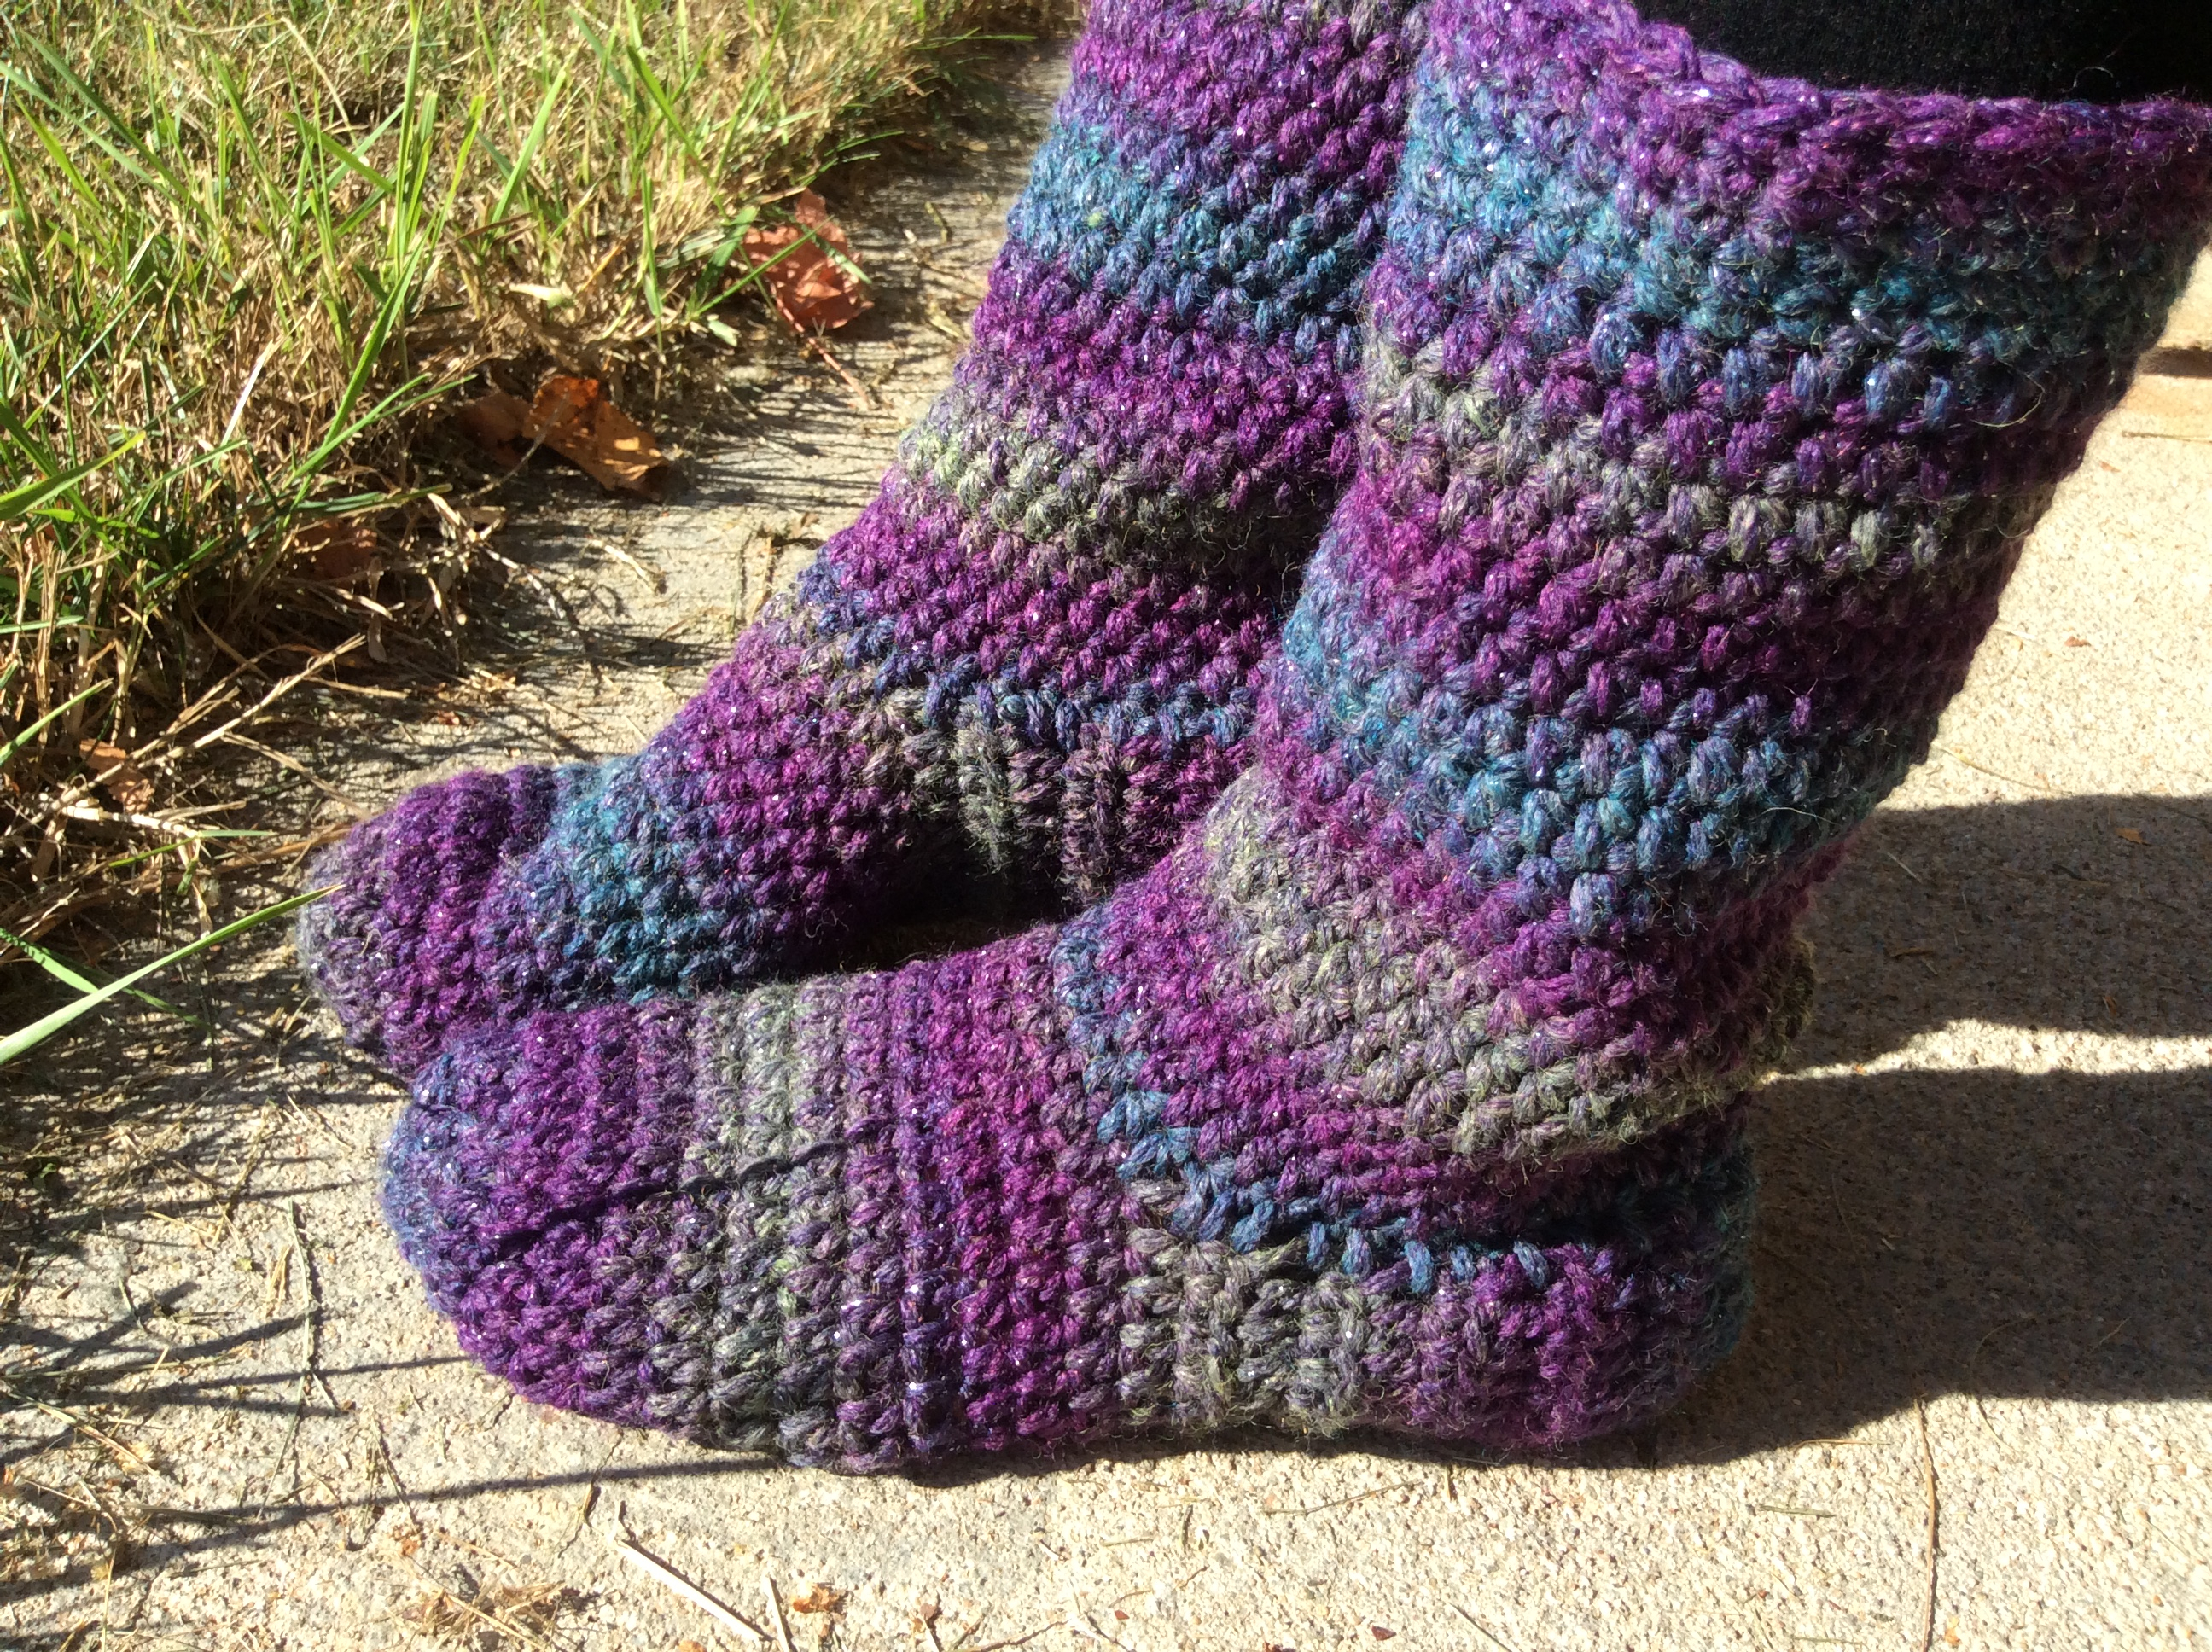 Crochet Slipper Boots Free Pattern How To Make Basic Crocheted Slipper Boots Updated Free Pattern In